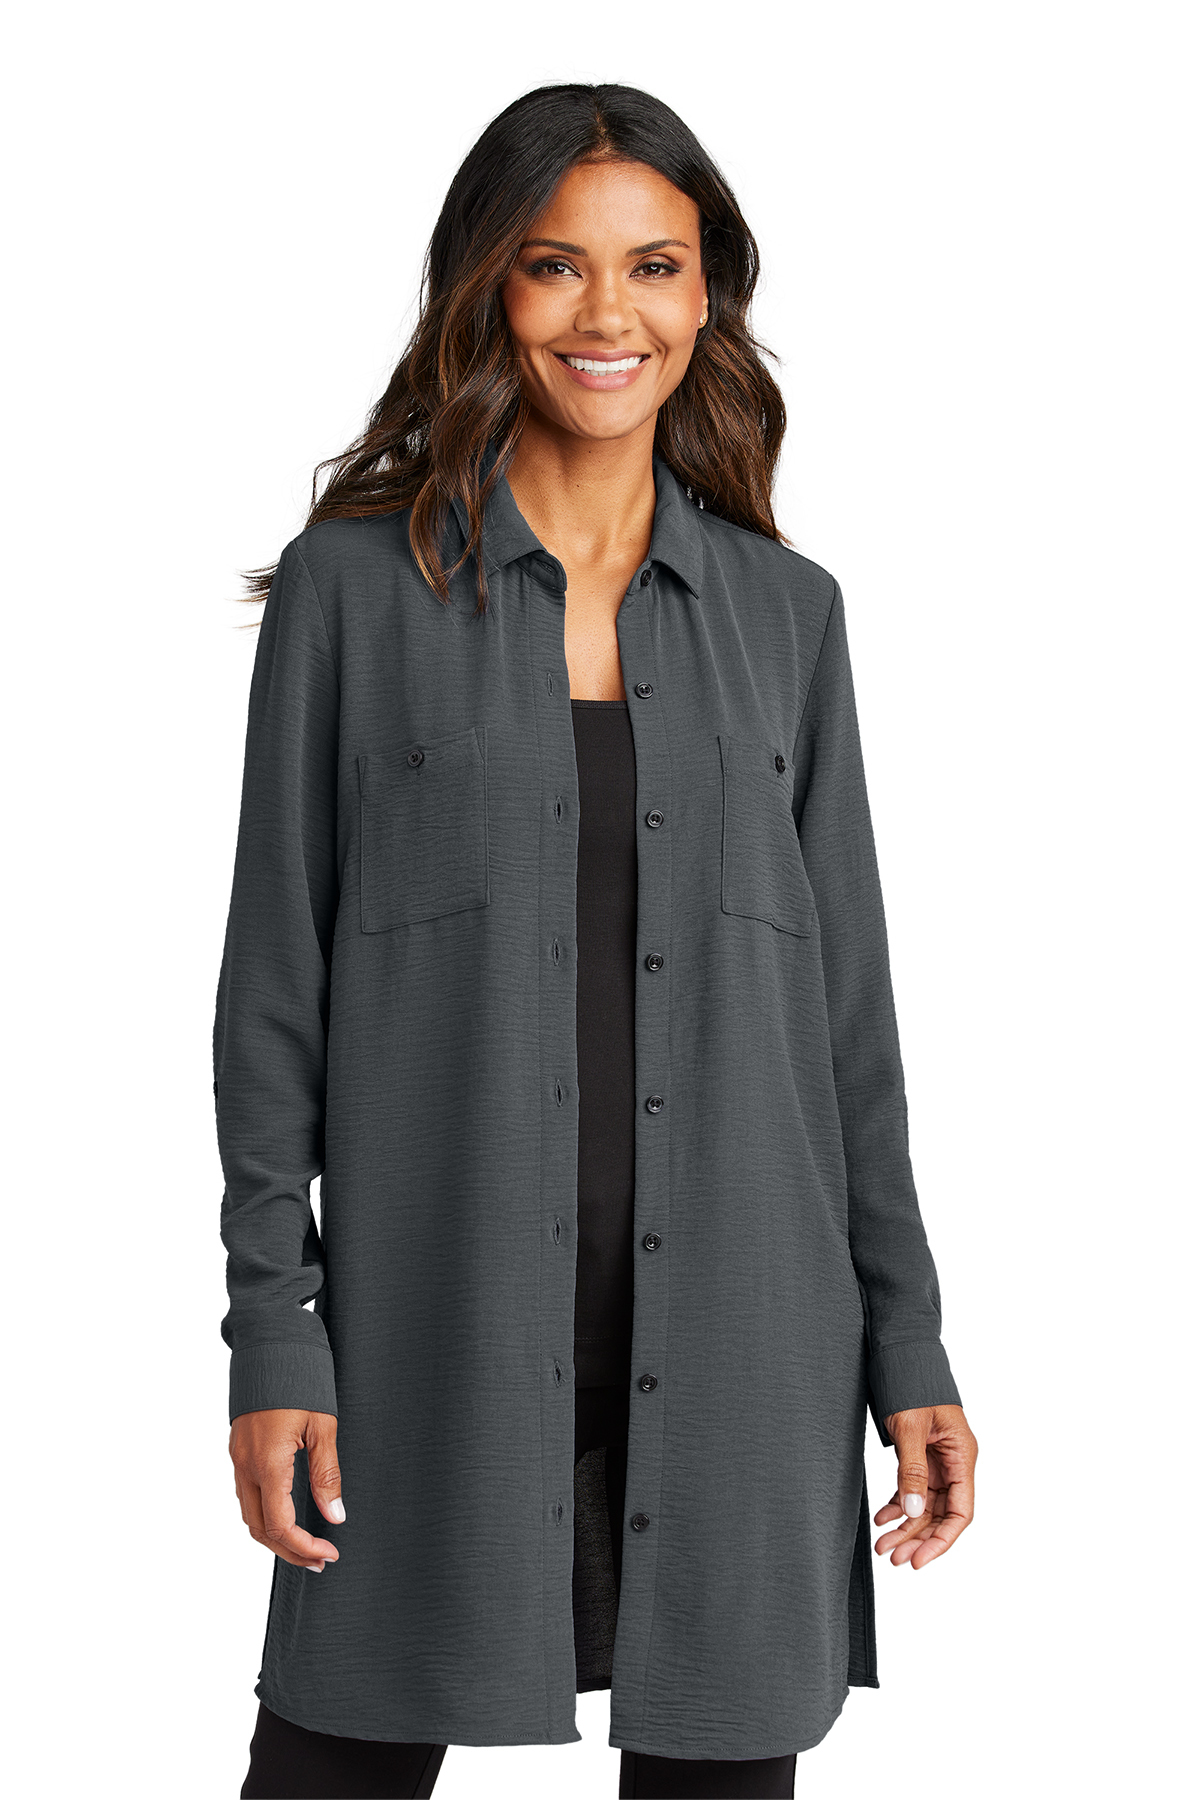 Port Authority Ladies Textured Crepe Long Tunic, Product